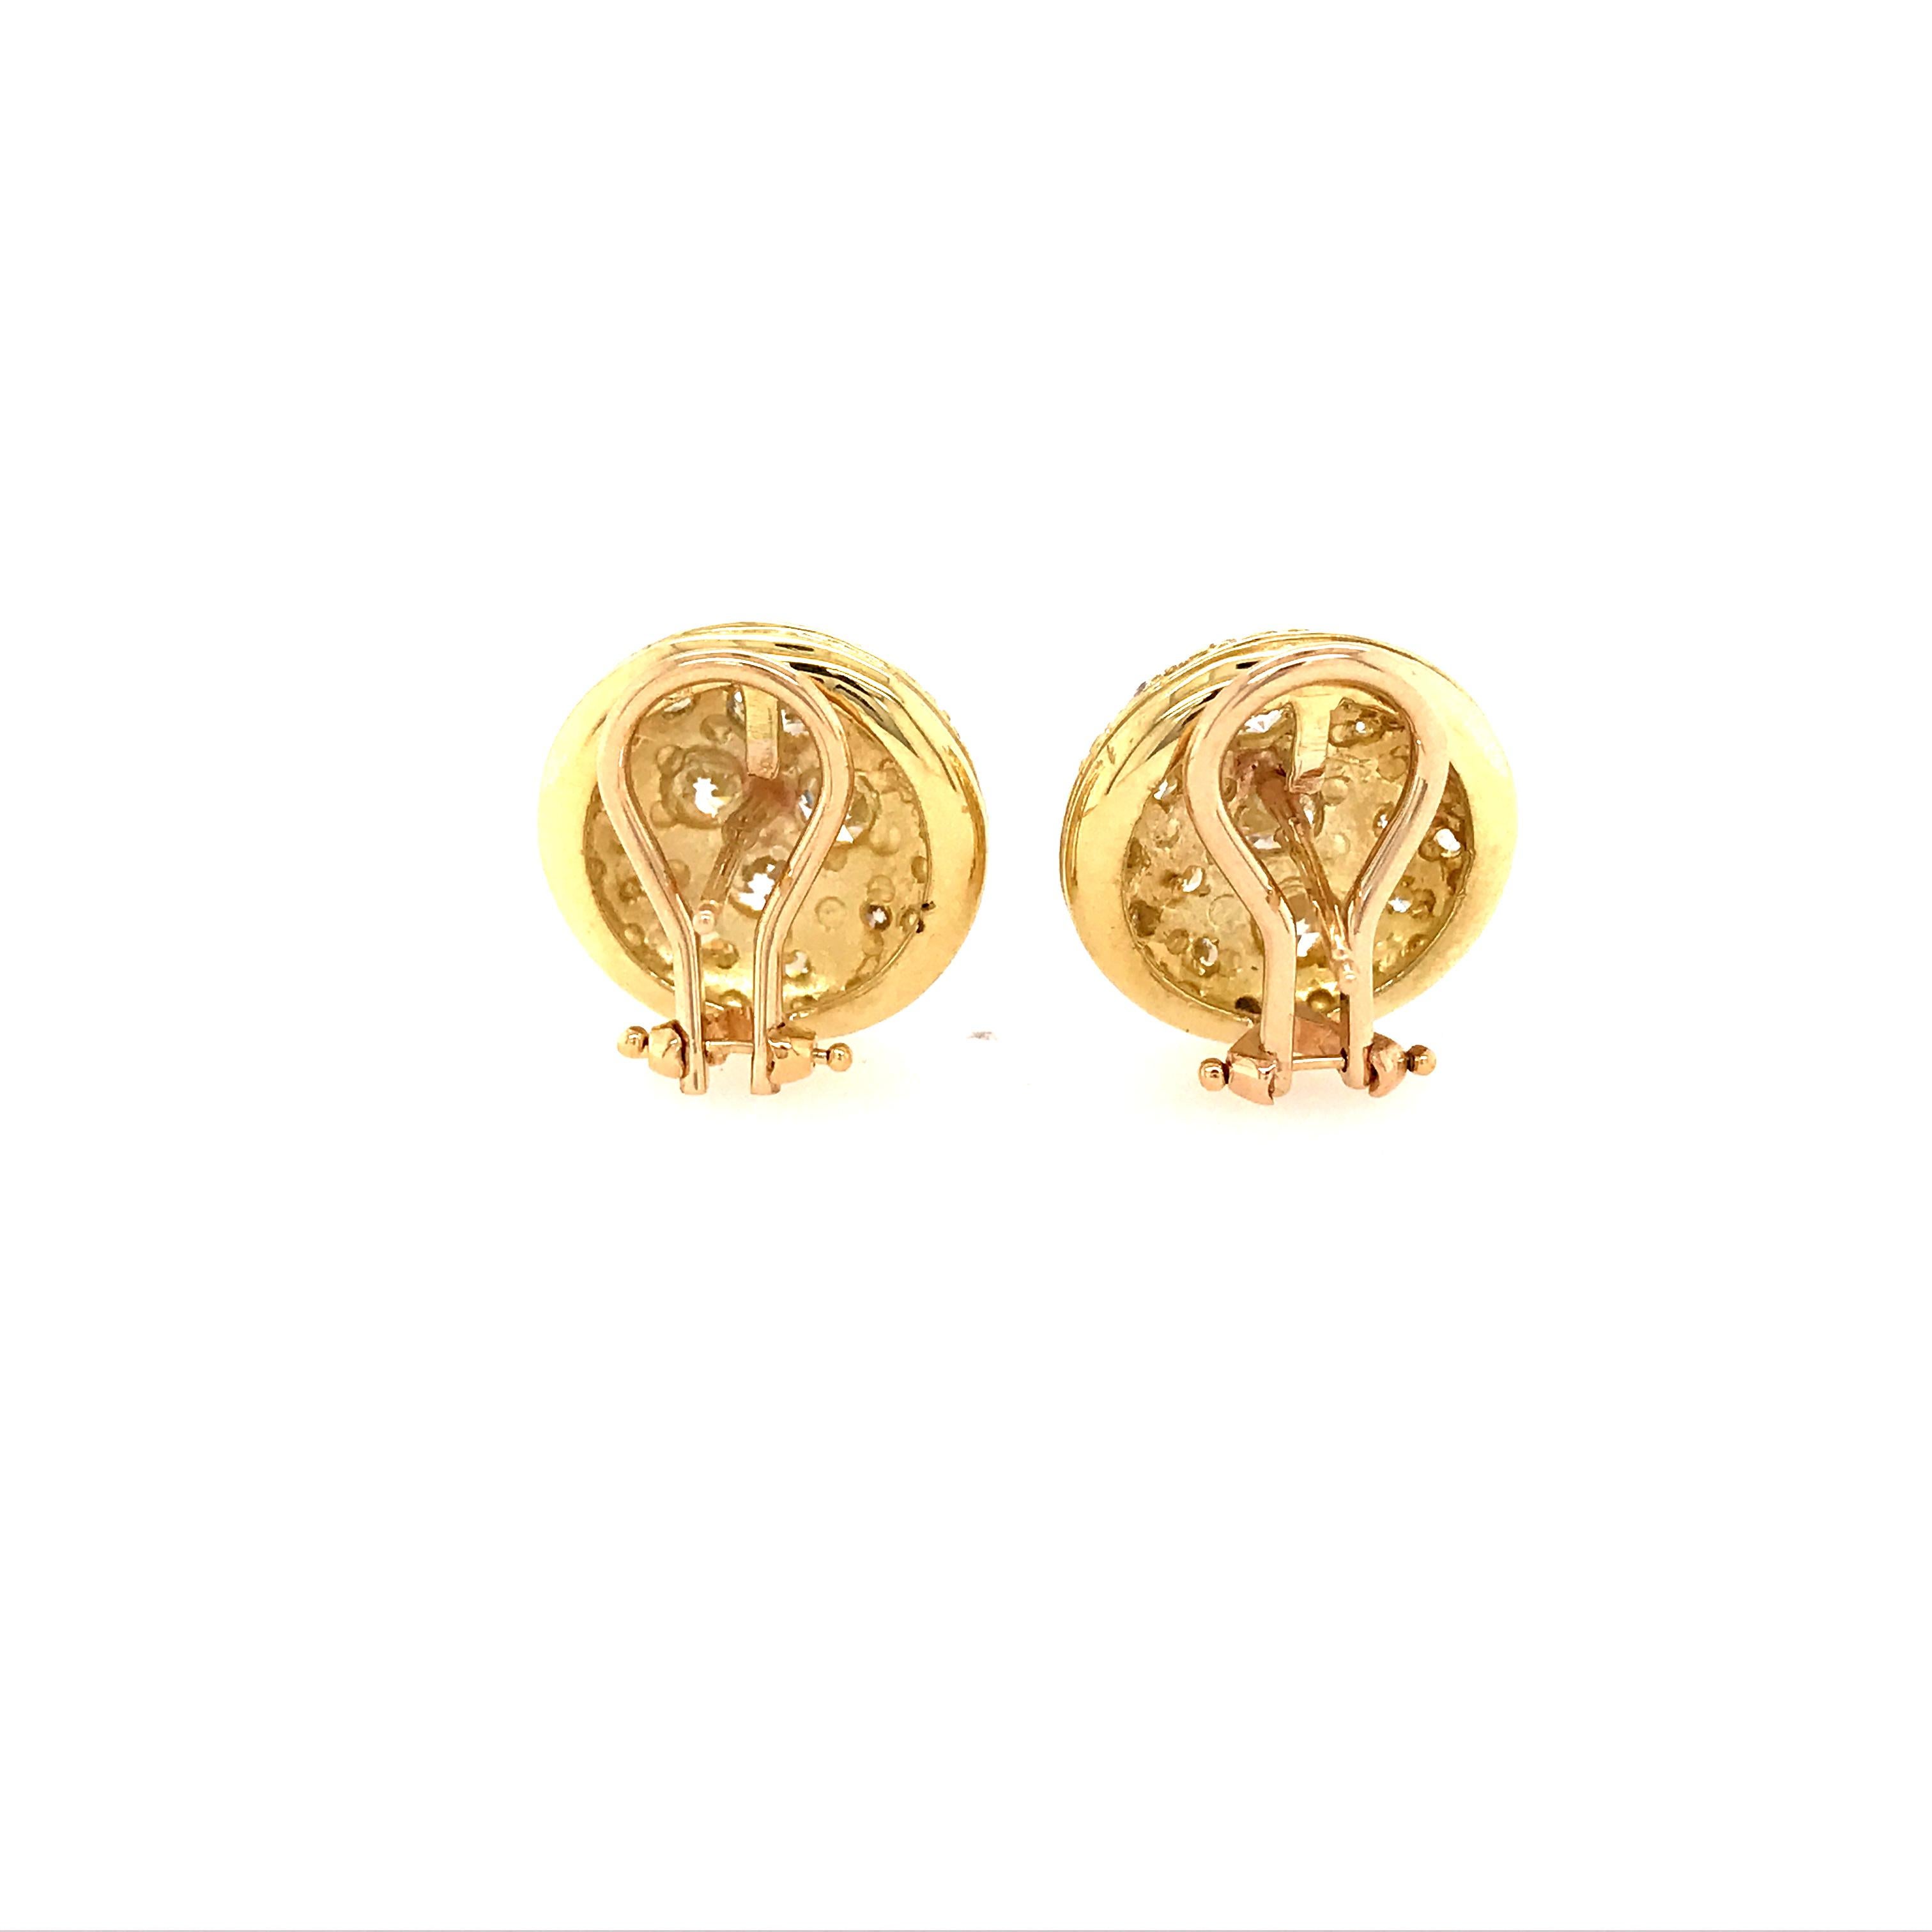 A unique pair of Diamond Button Earrings with Milligrain in 18K Yellow Gold.  (28) Round Brilliant Cut Diamonds, 2.66 carat total weight, G-I in color and VS-SI are expertly set in these earrings.  They measure approximately 5/8 inch in diameter and